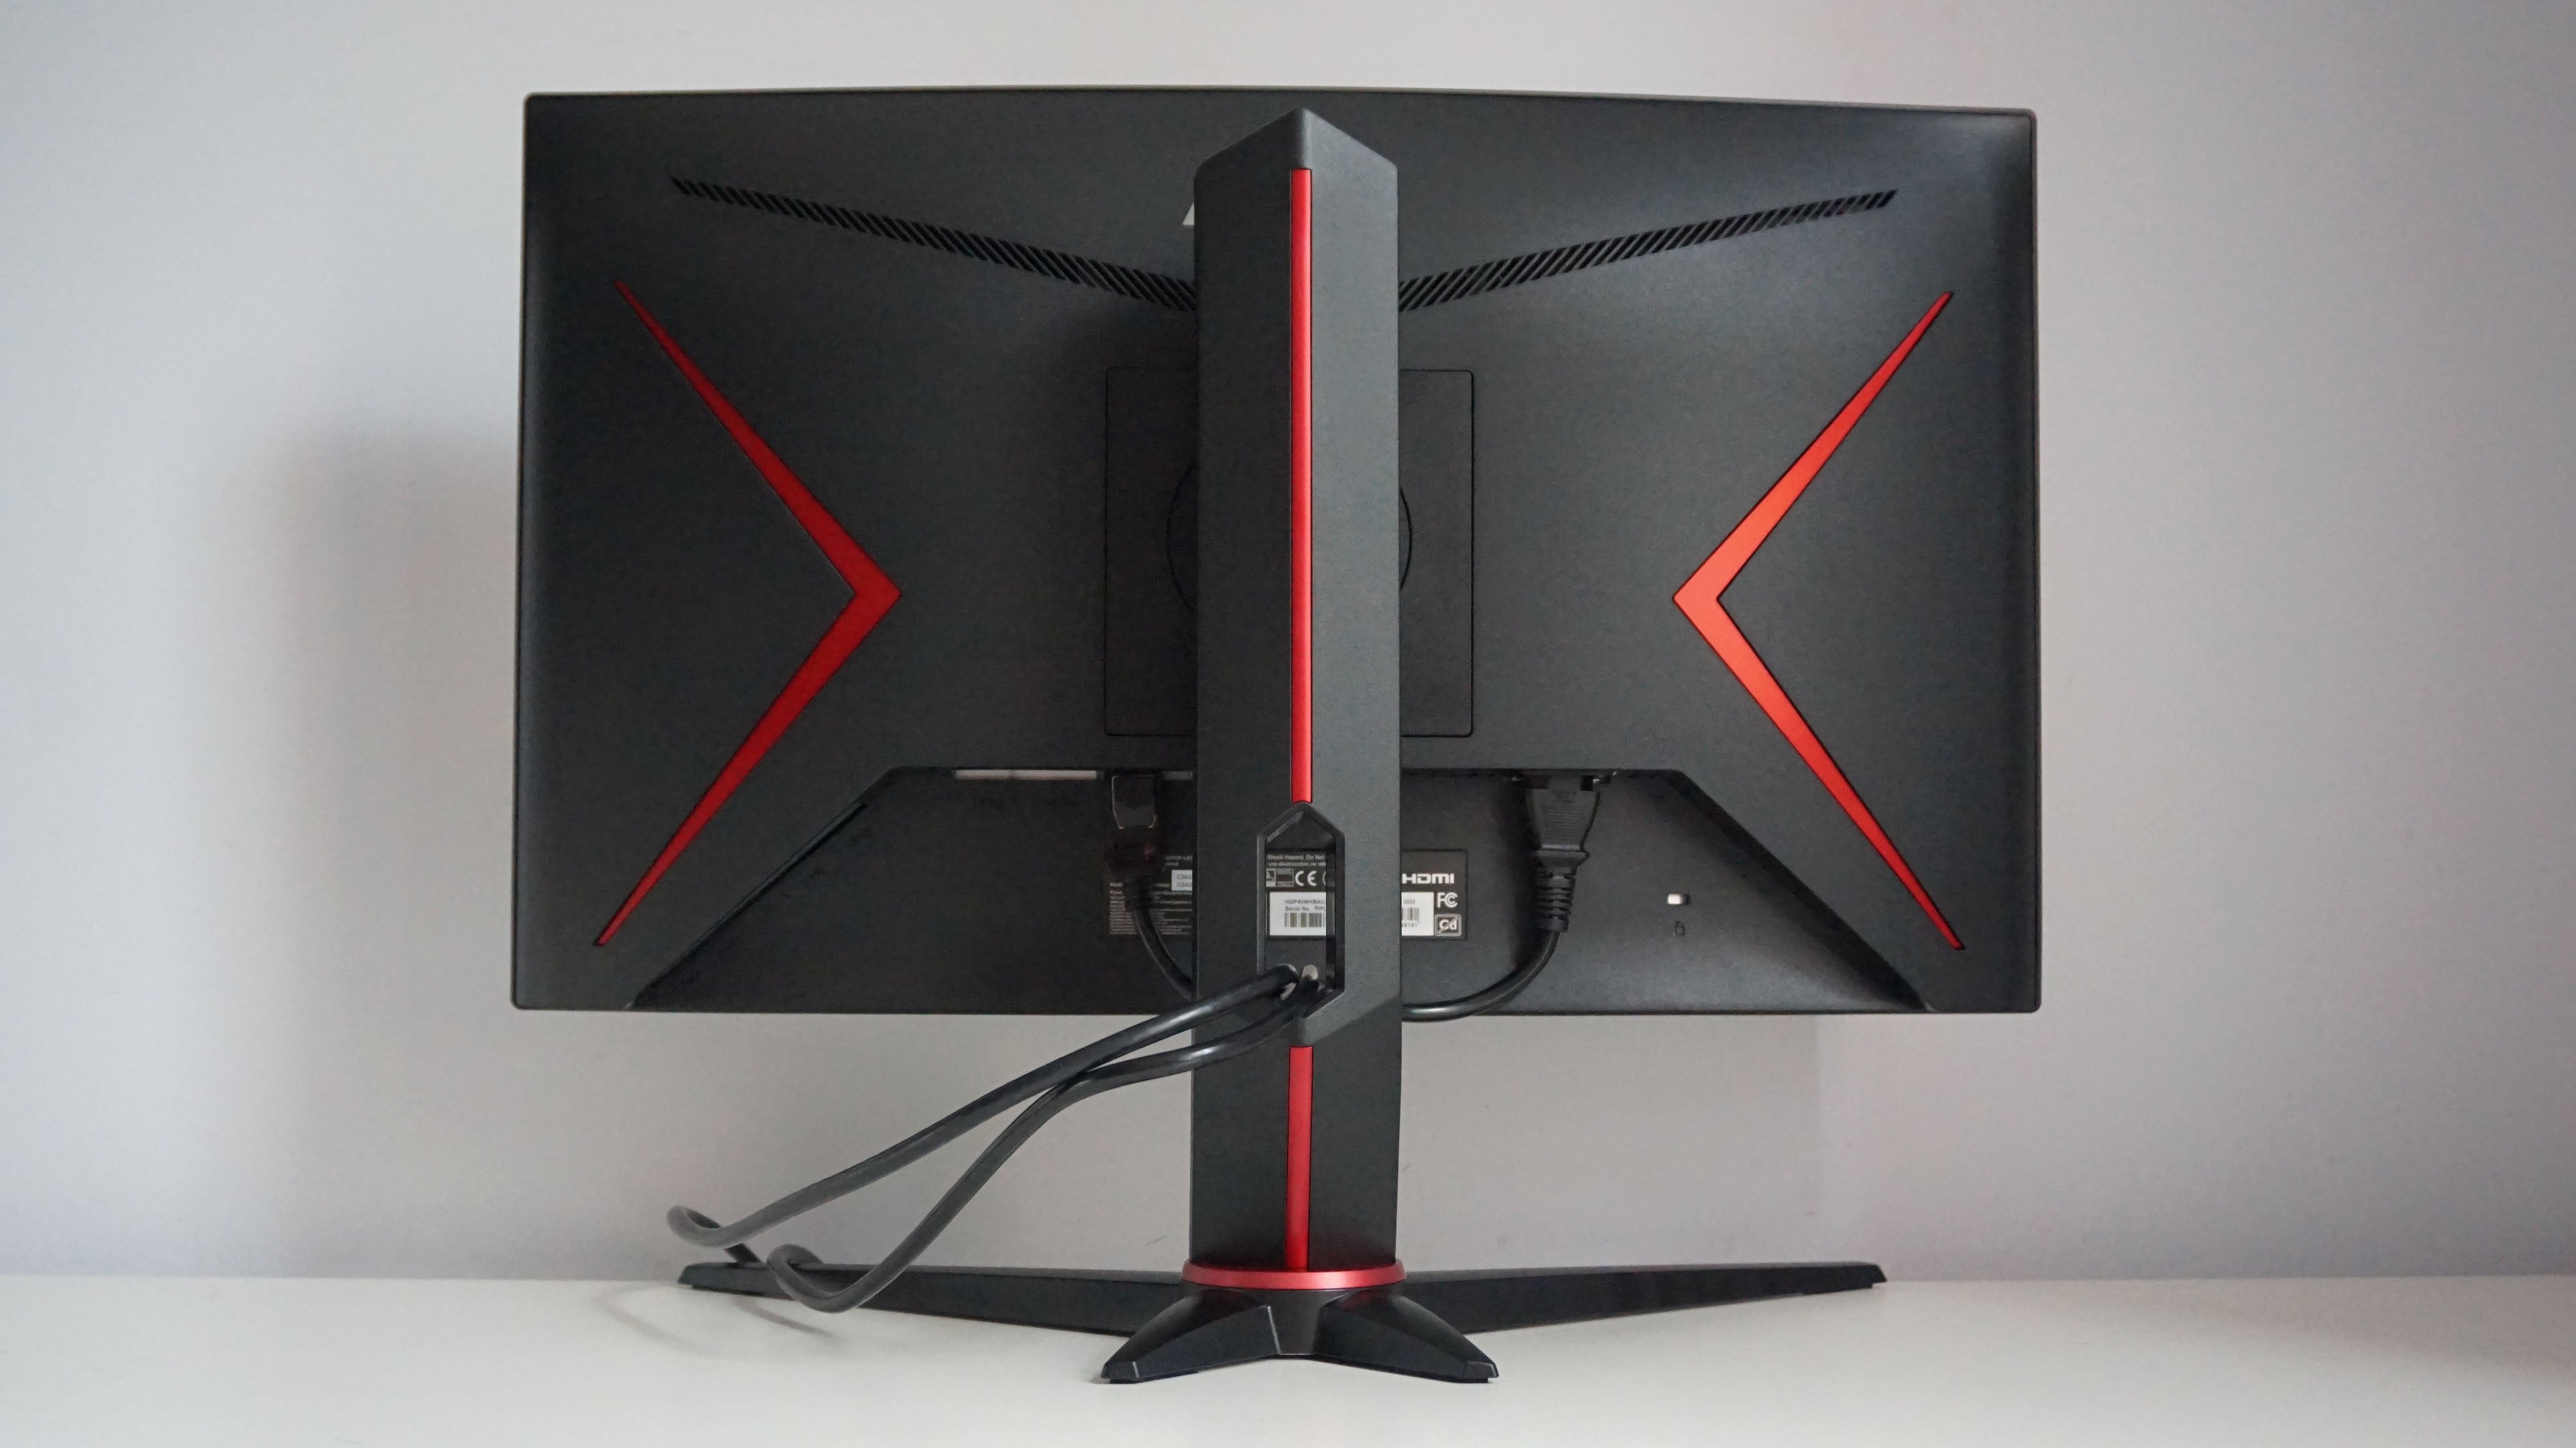 A photo of the AOC C24G2U gaming monitor from behind